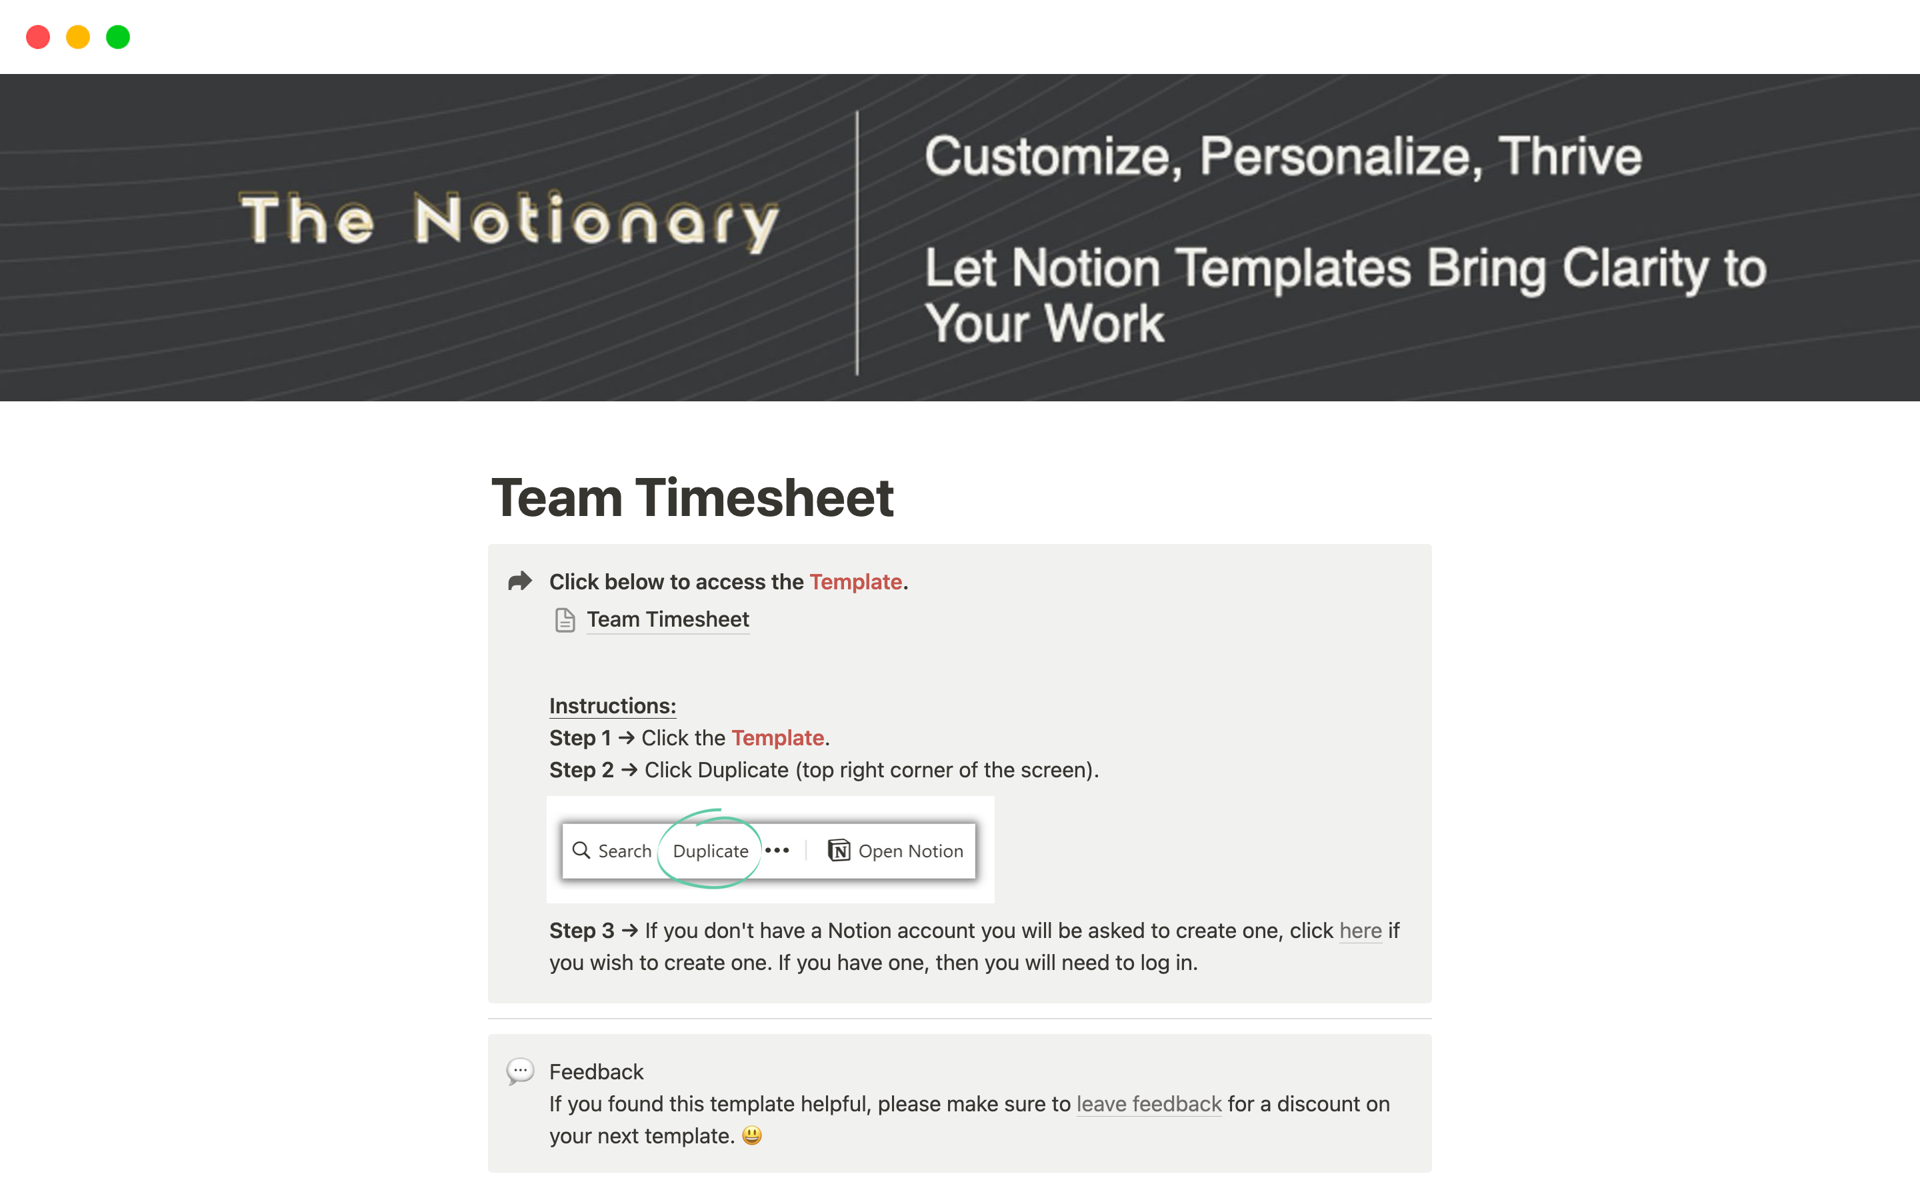 The Notionary's Team Timesheet template includes tabs for Projects, Team Members, Tasks and aims to help keep track of everyone's time spent per task and project.